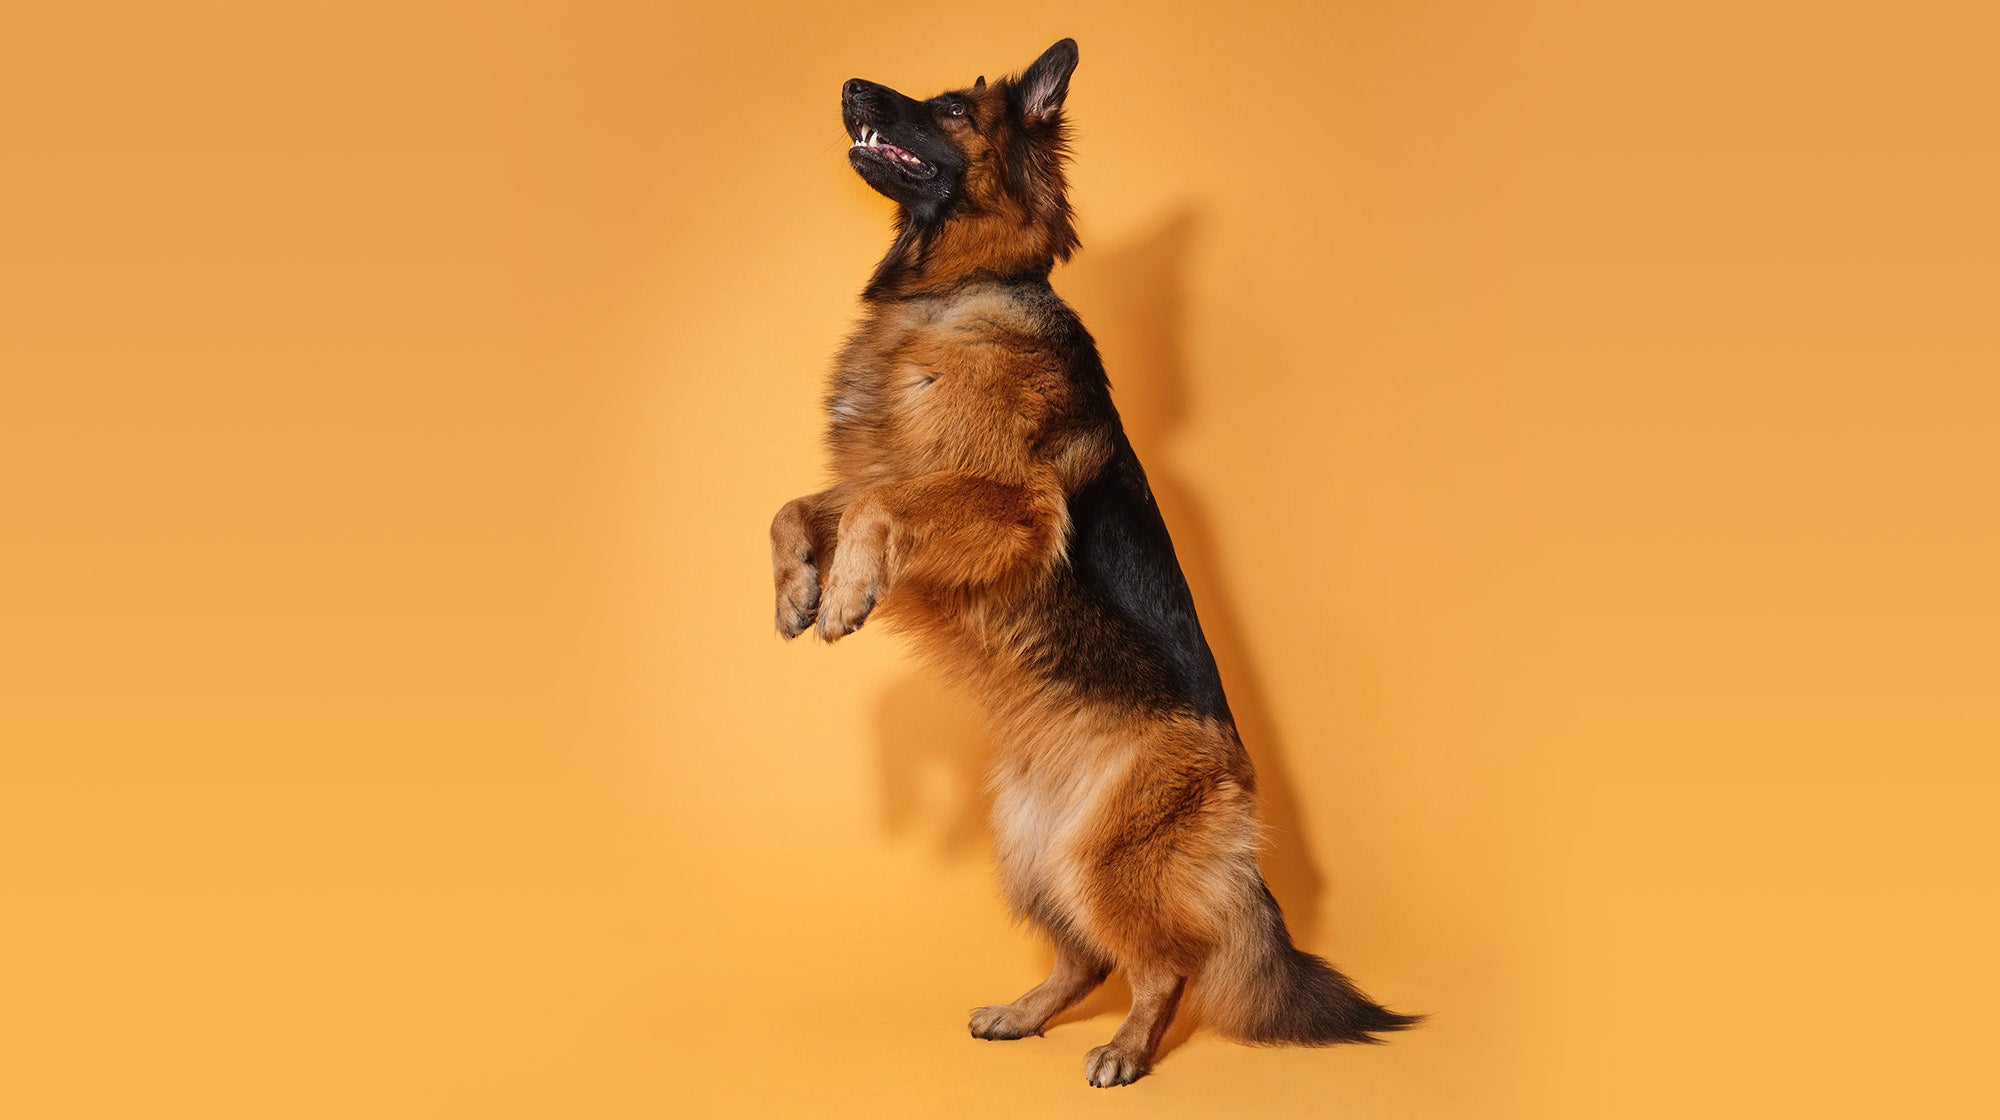 german shepherd standing on two legs on a yellow background